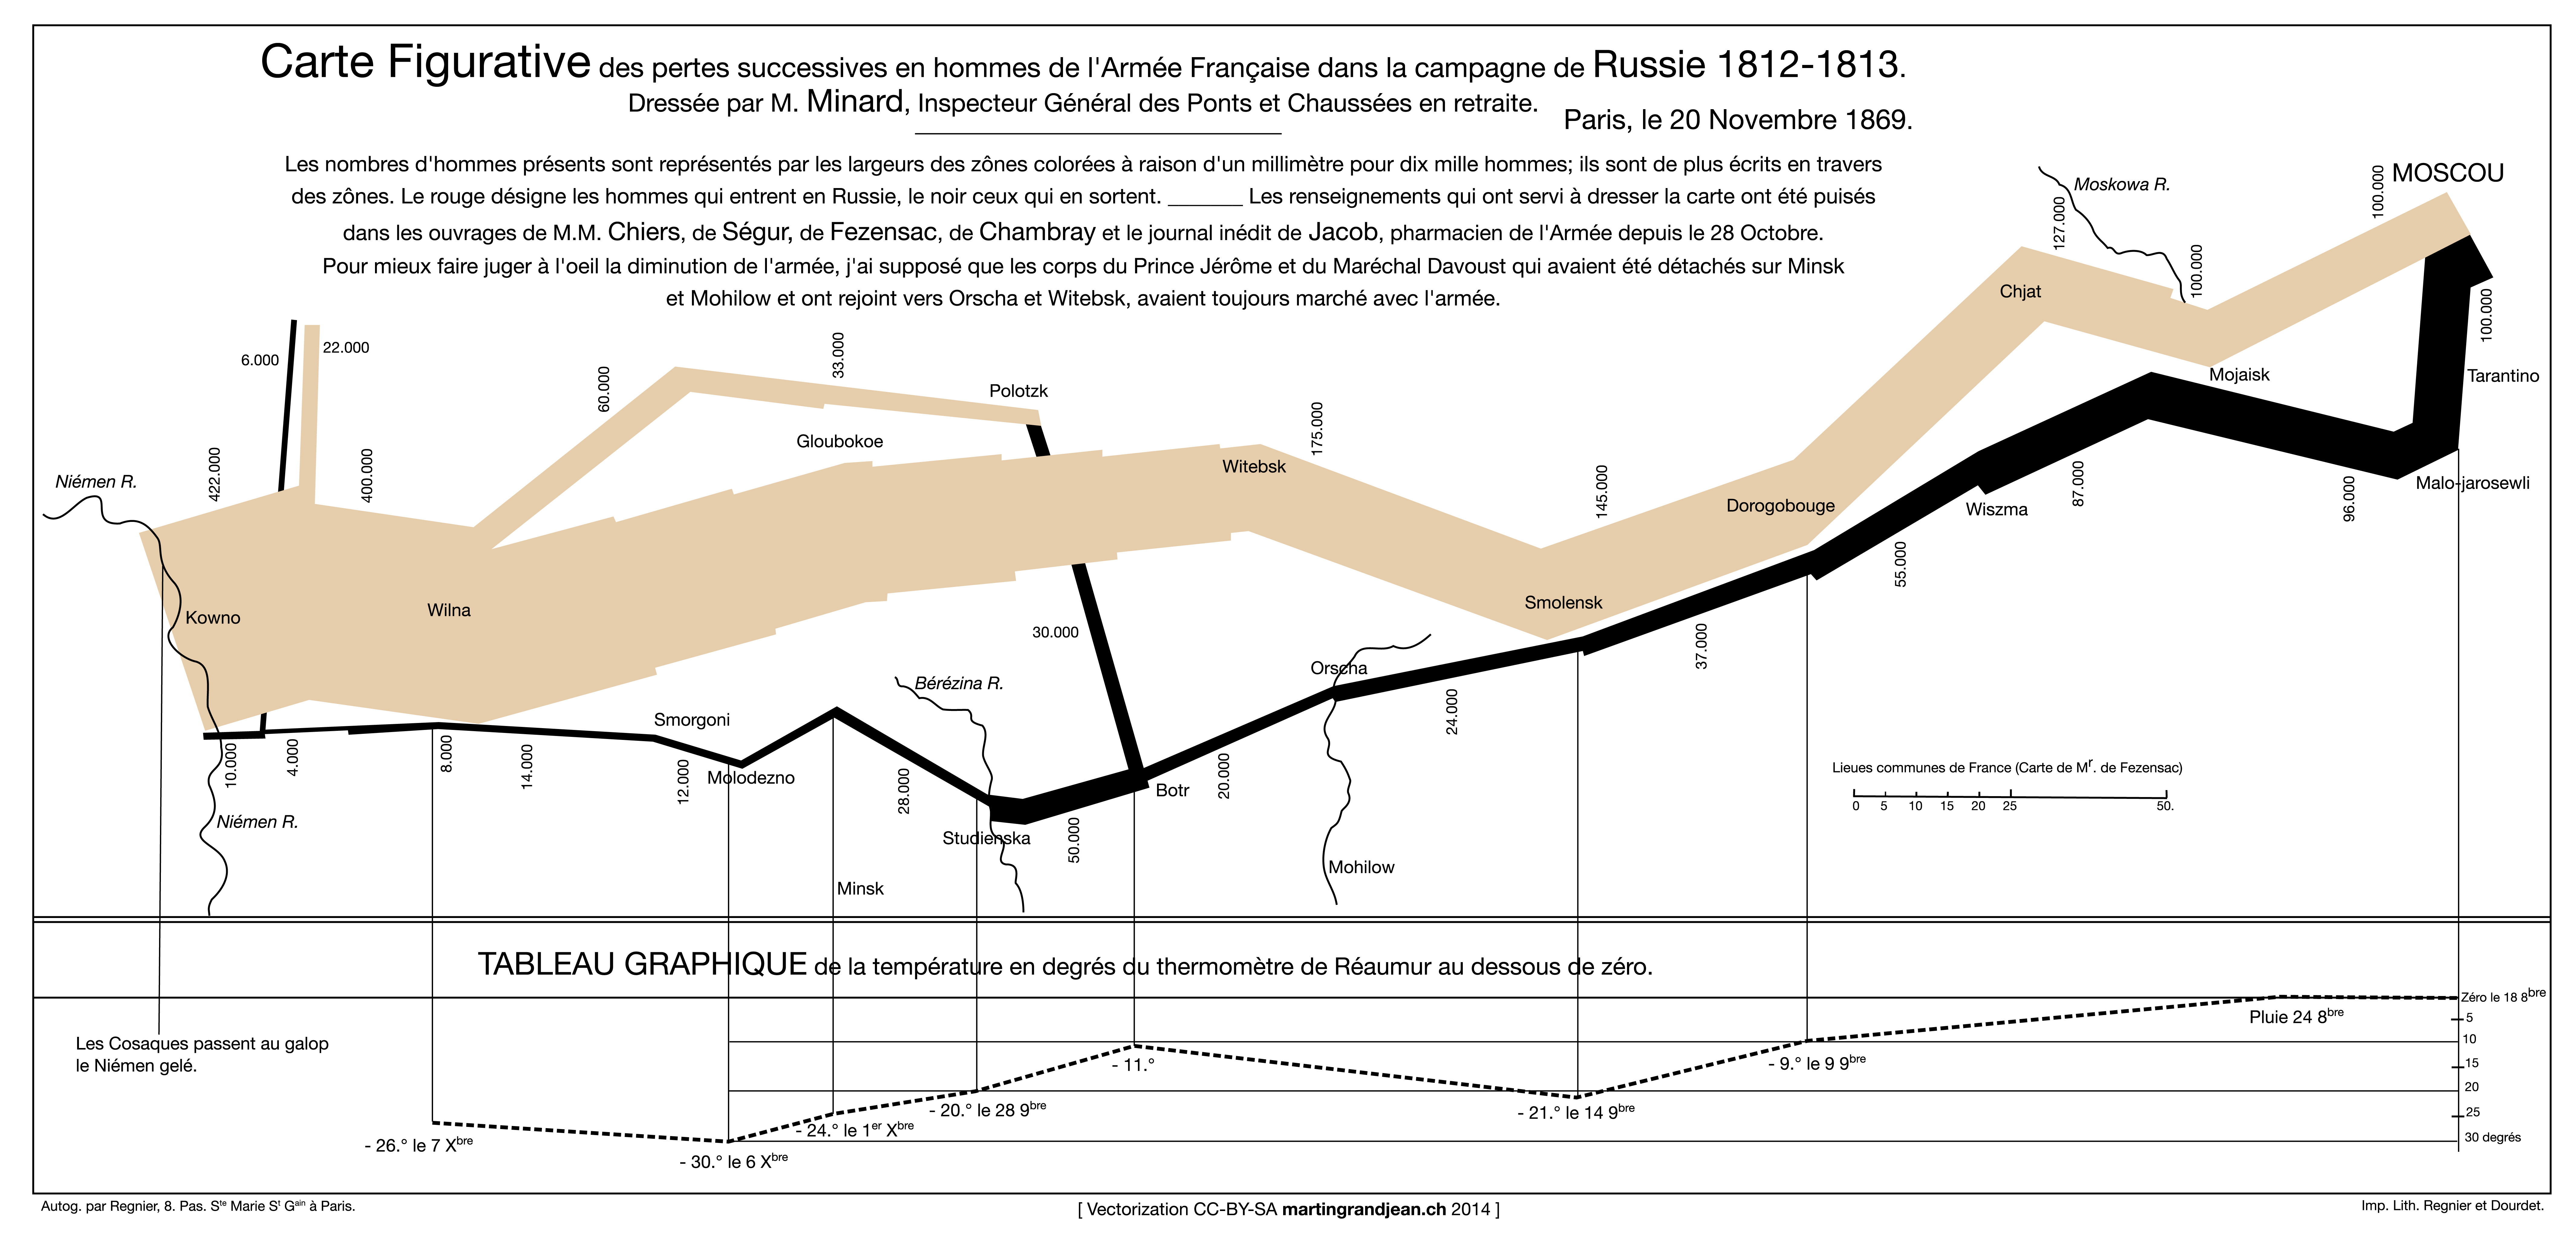 Minard’s Map of successive losses in men of French Army in Russian campaign 1812-1813, in French